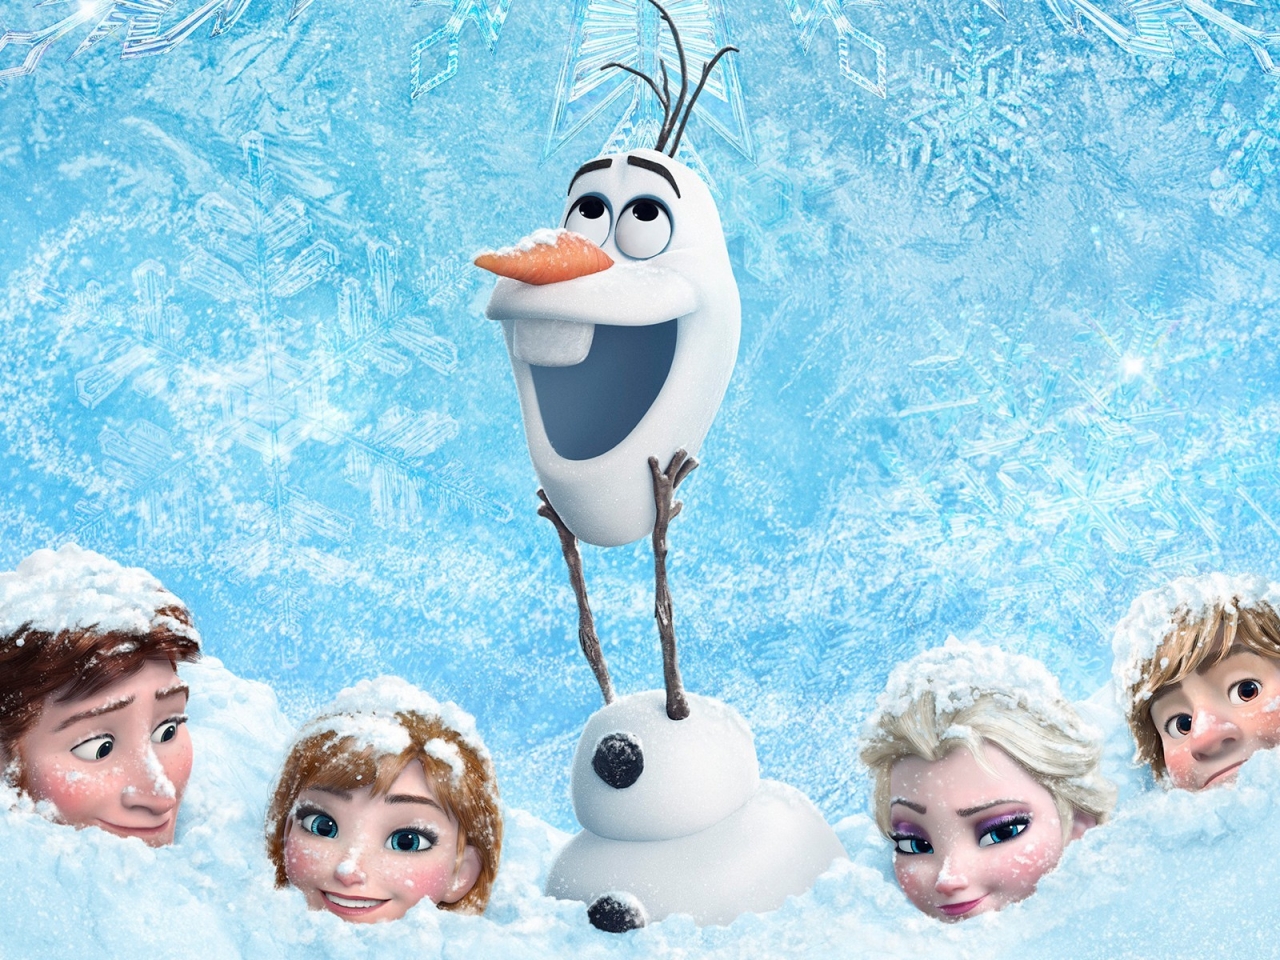 Frozen Animation for 1280 x 960 resolution